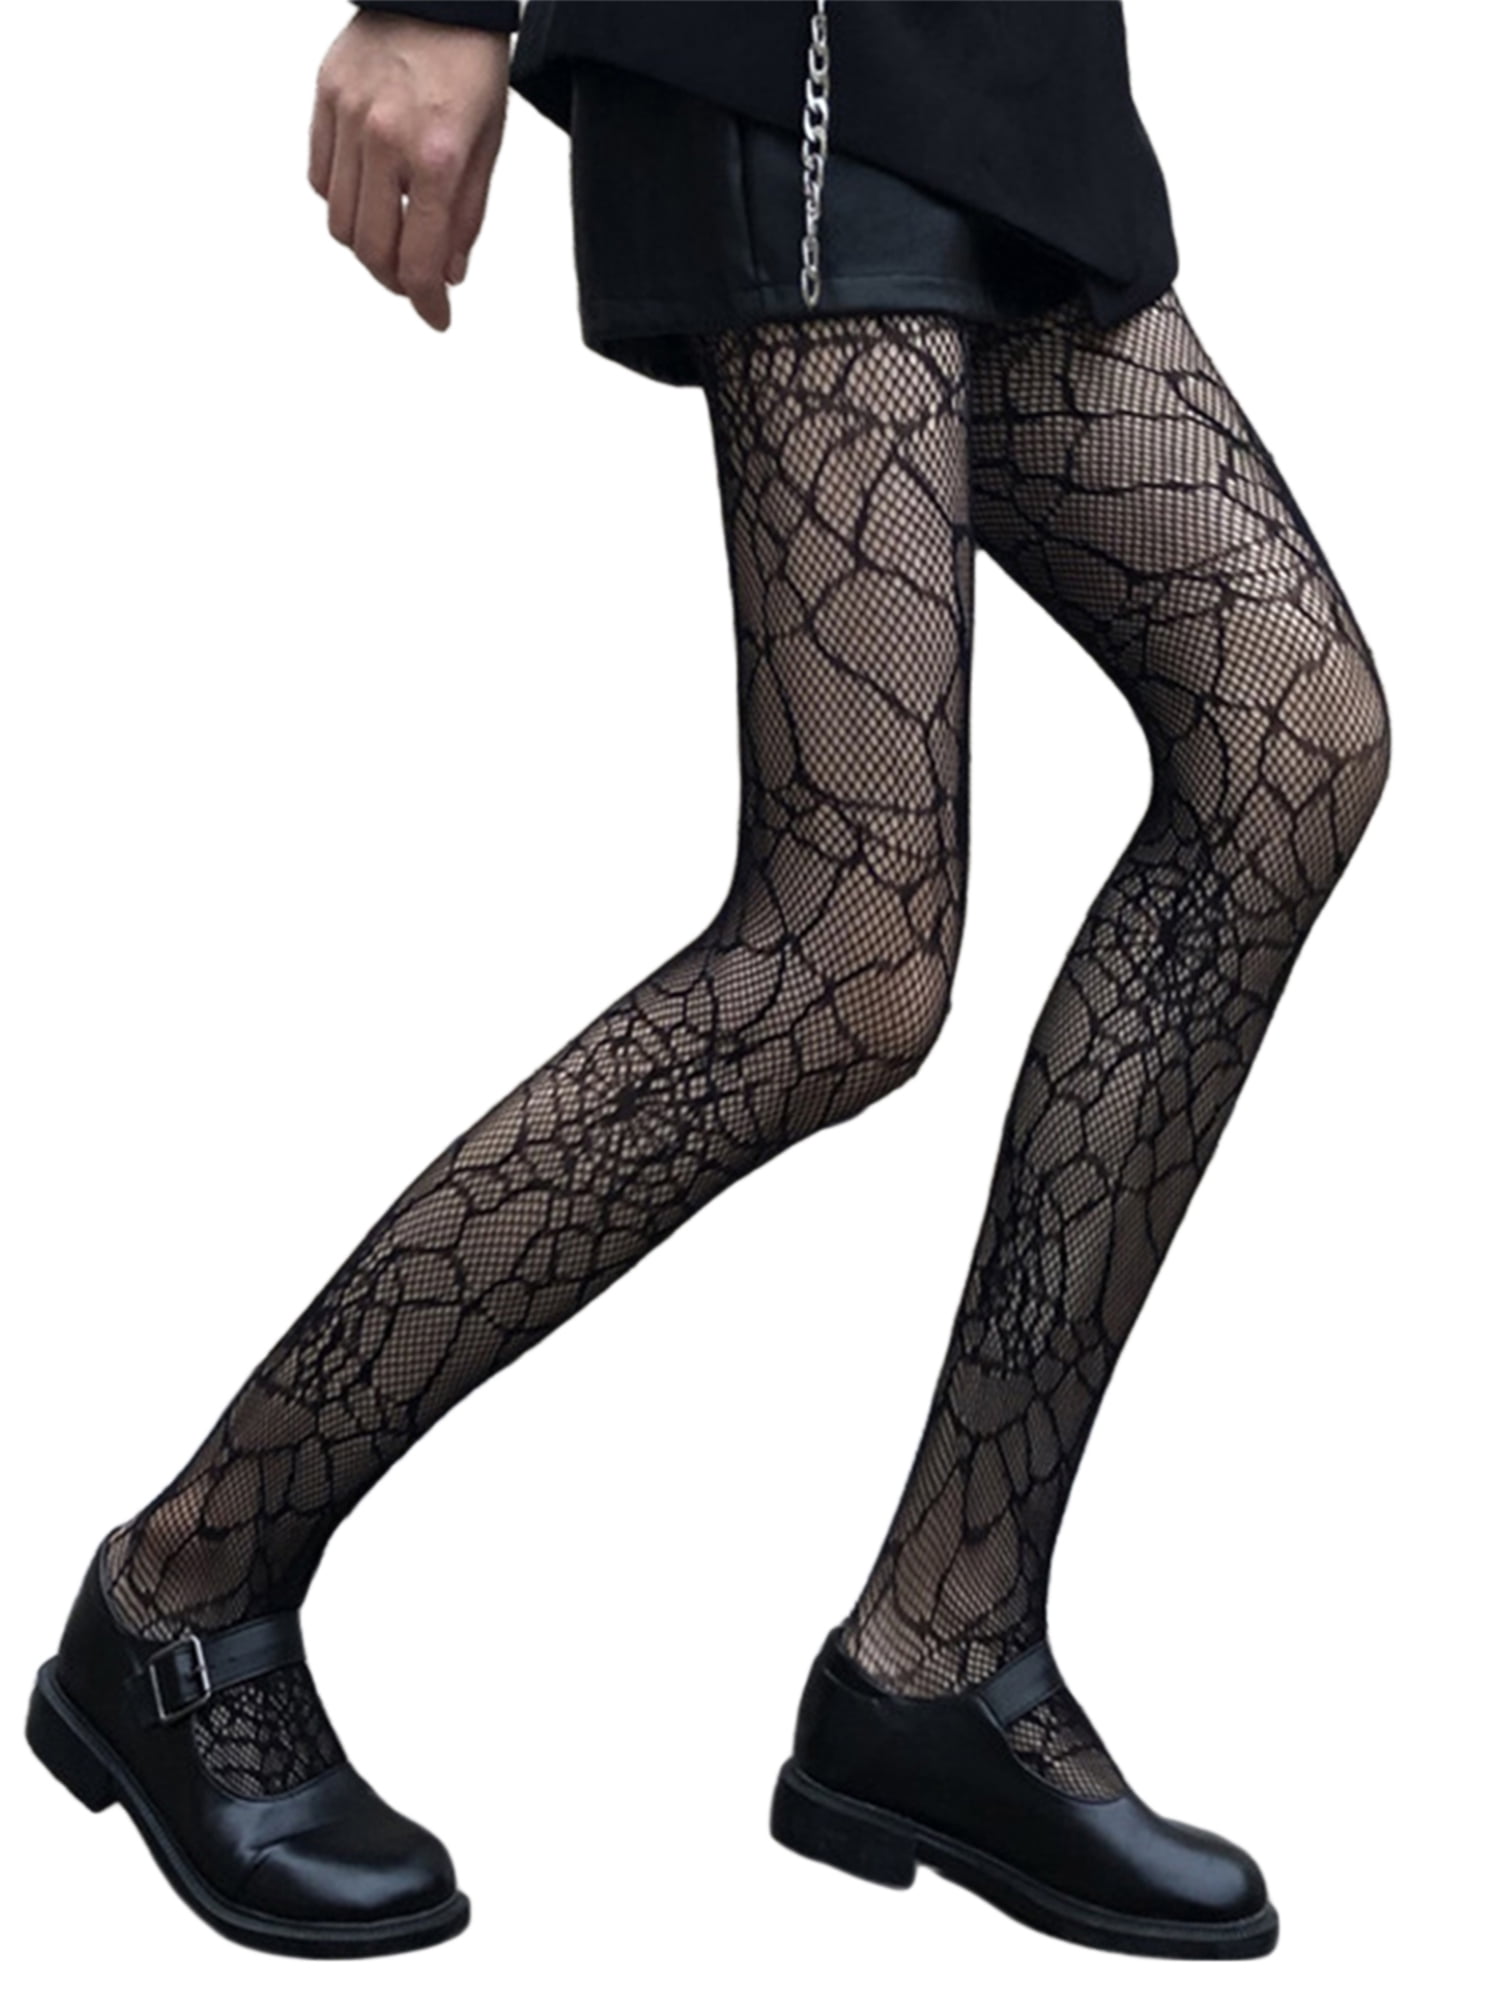 Douhoow Women Spider Web Tights Socks Tights Gothic See Through ...